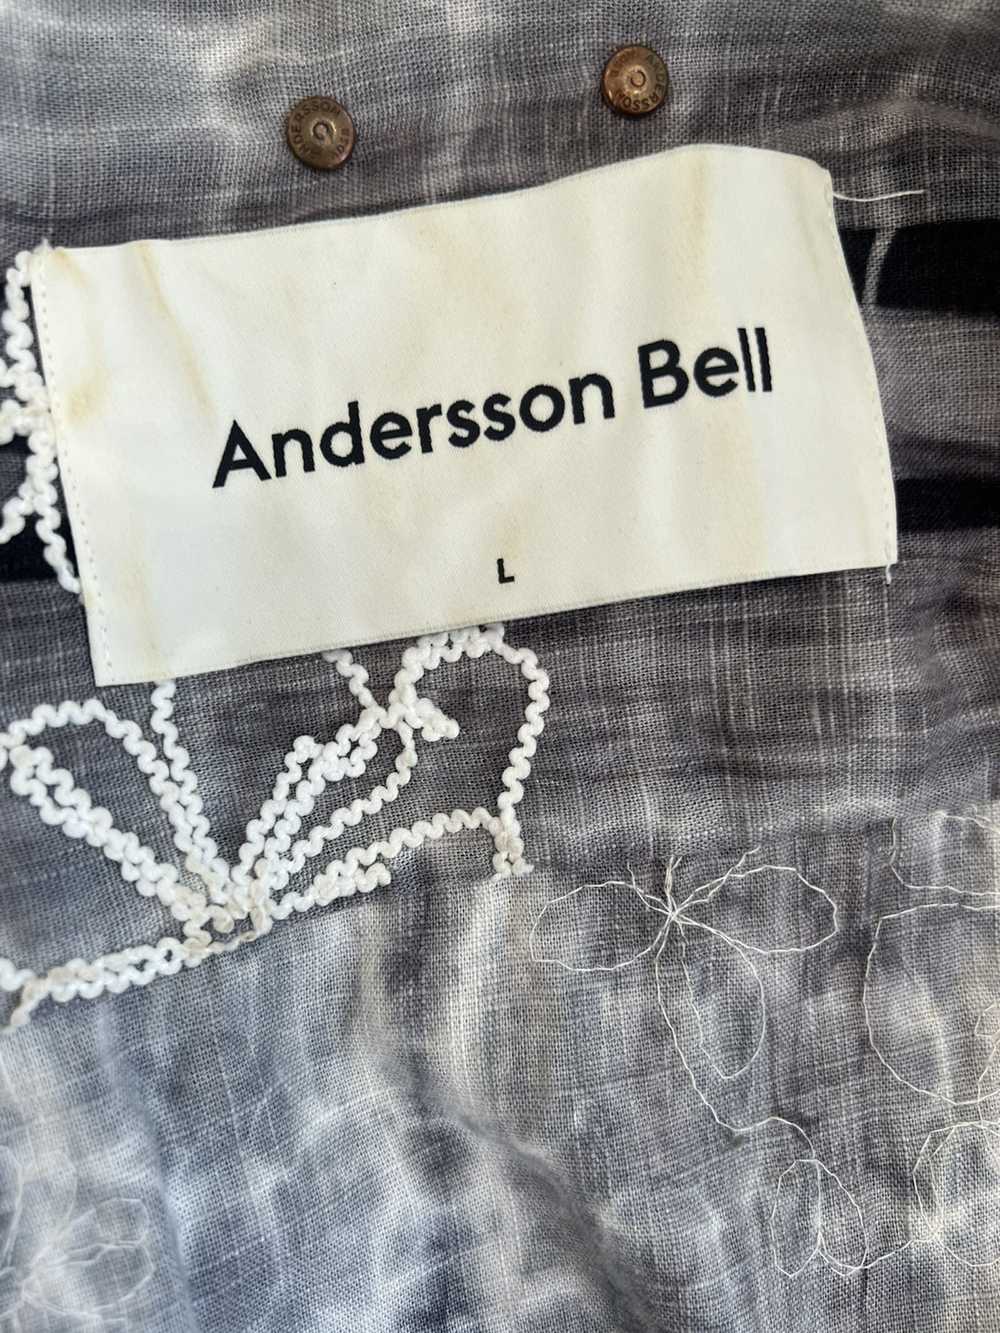 Andersson Bell Anderson bell floral shirt - image 3